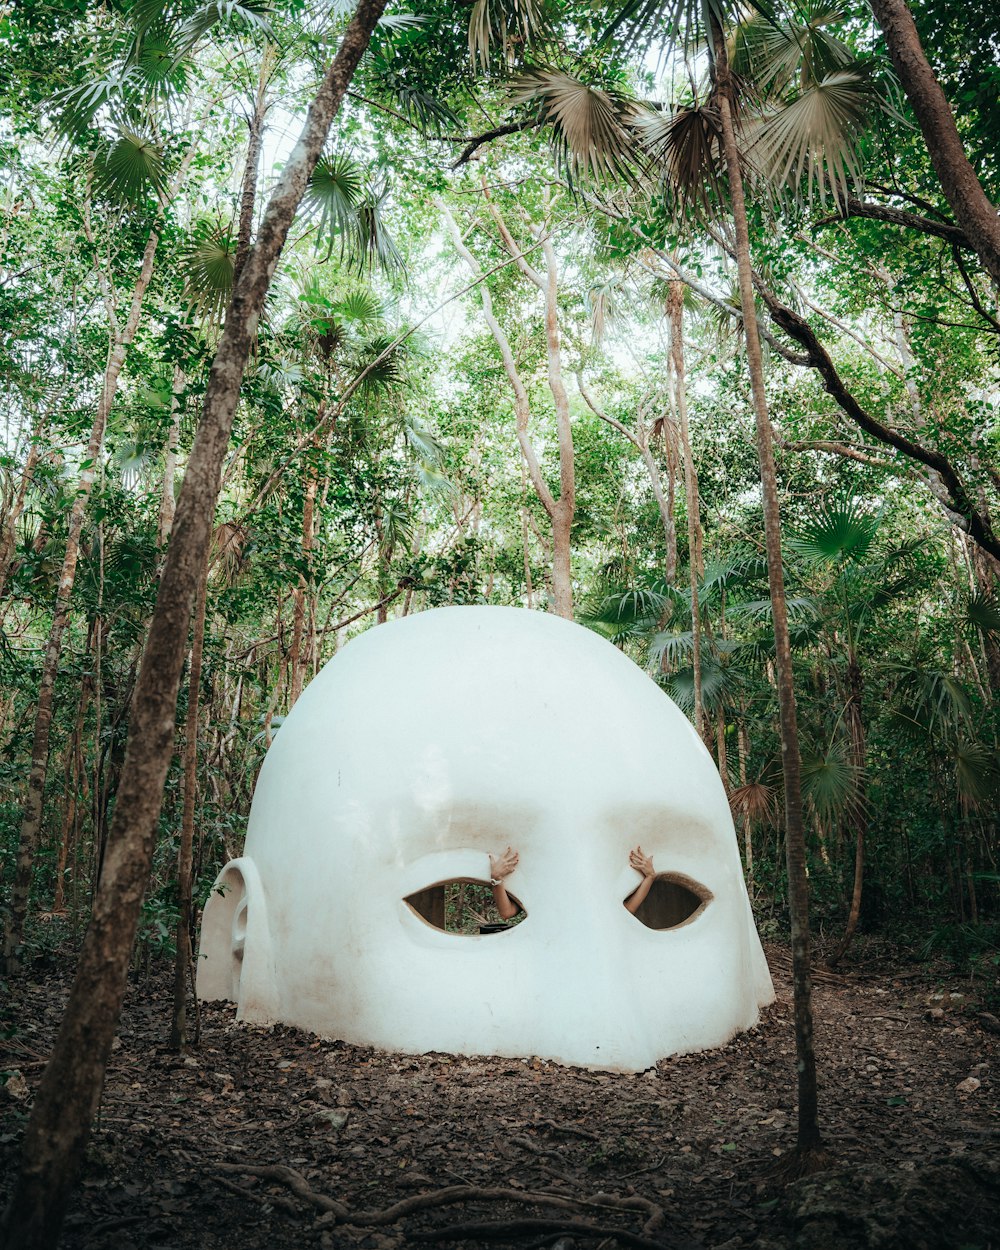 a white spherical object surrounded by trees